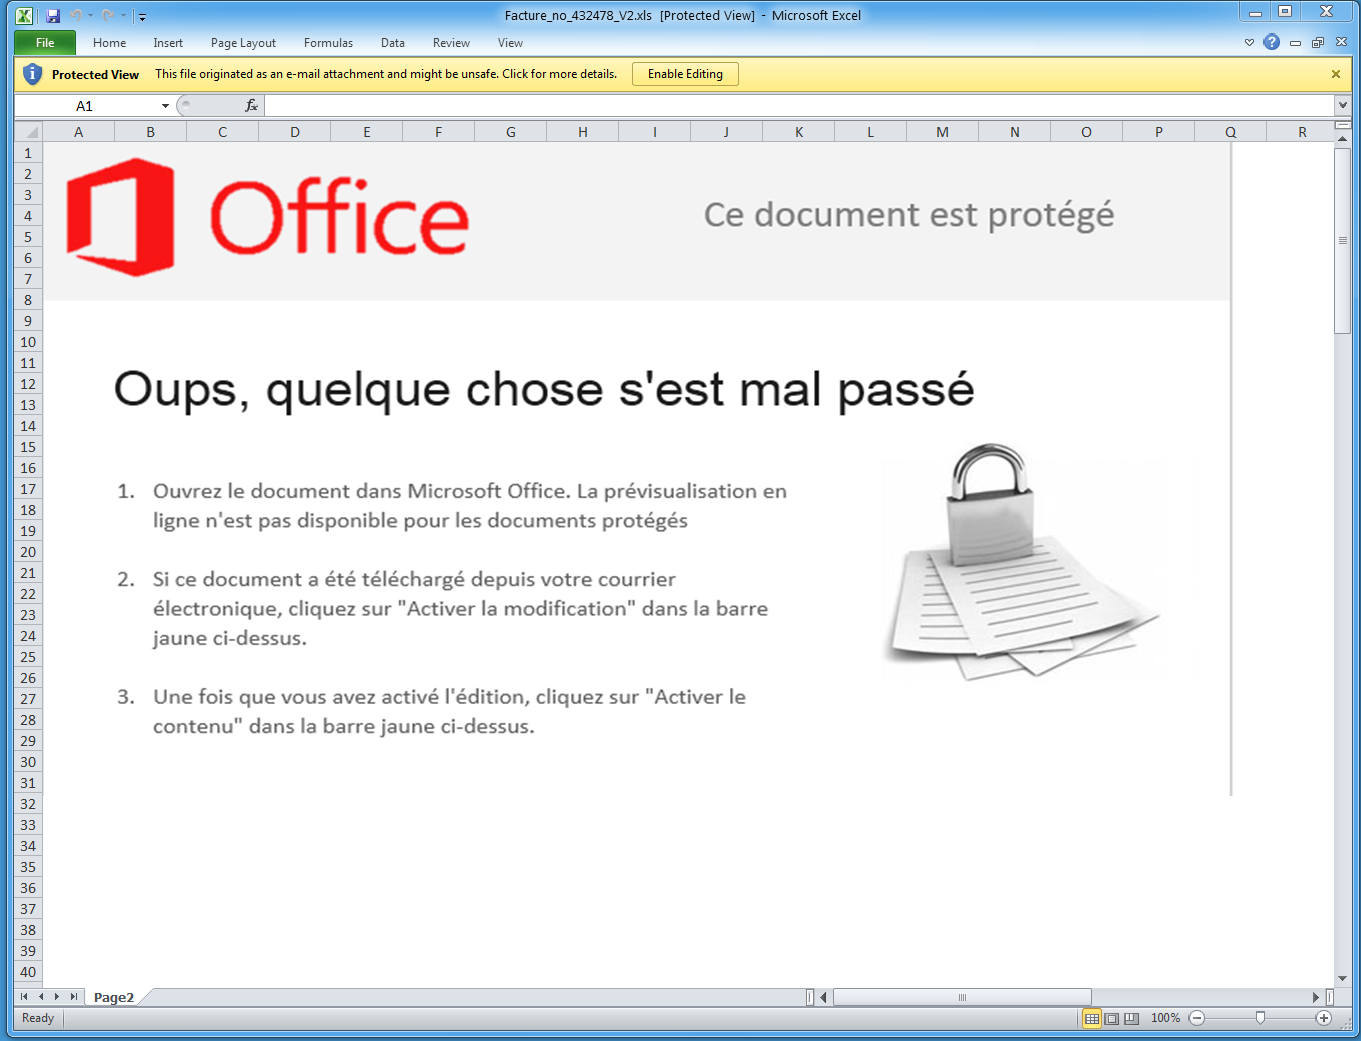 Microsoft Excel attachment using French language and targeting Canada.